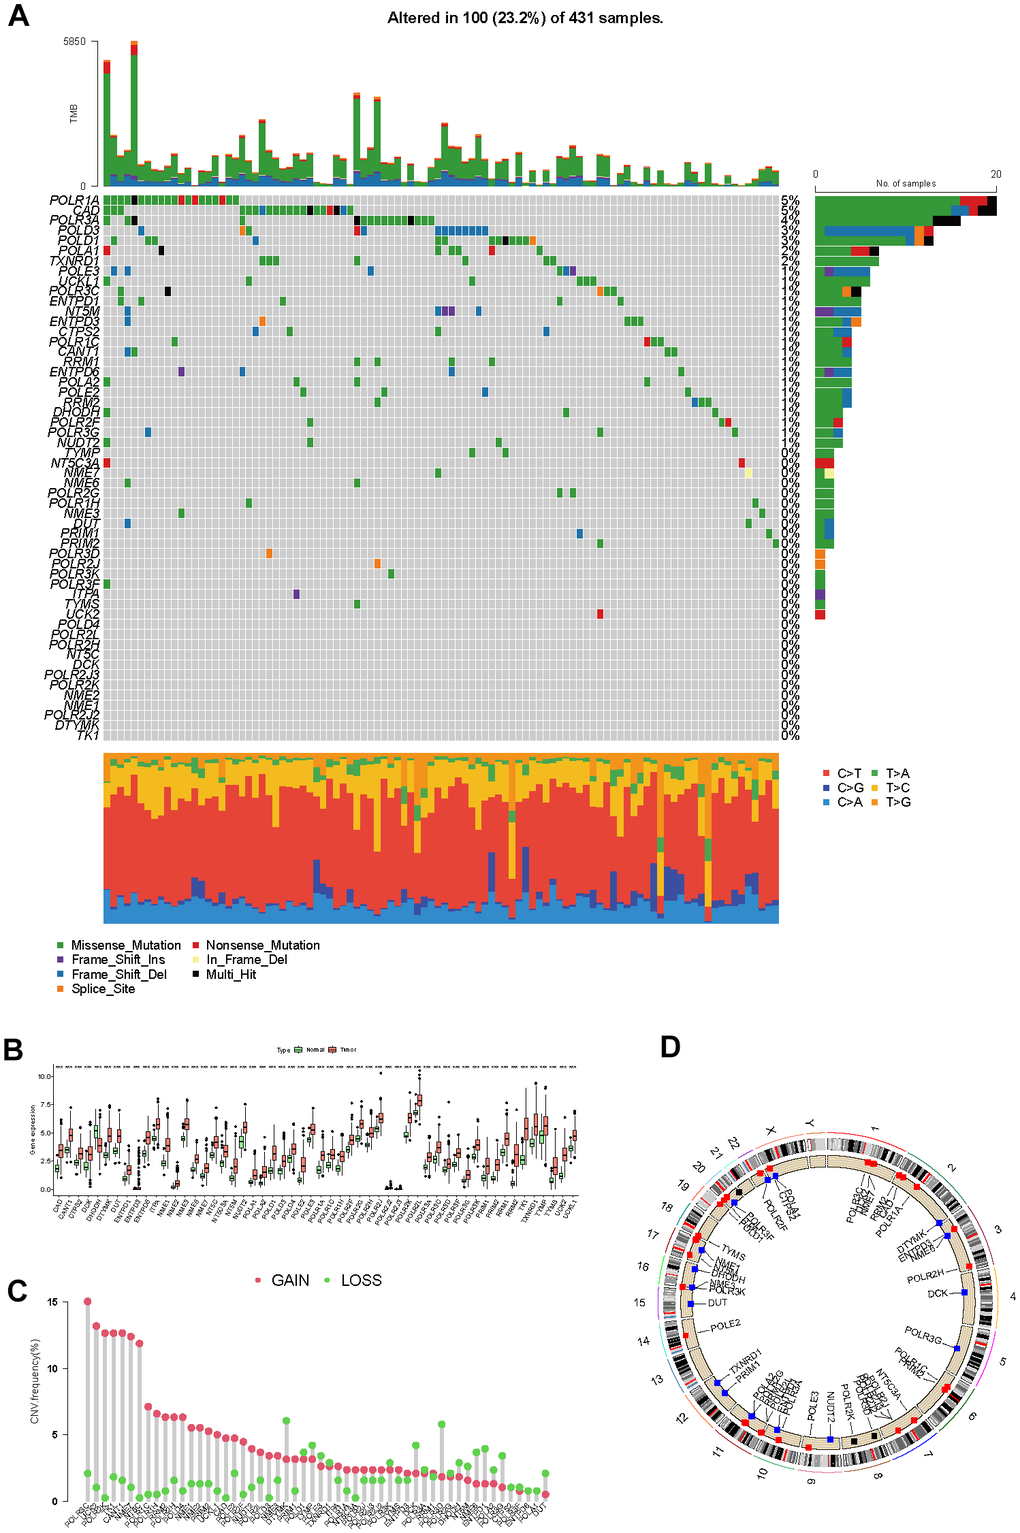 The genetic and transcriptional landscape of PMRGs. (A) The mutation profile of differentially expressed PMRGs in the TCGA-LIHC cohort. (B) The differential expression of PMRGs in HCC between tumor and normal tissues. (C) The CNV patterns of 54 PMRGs within HCC. (D) The locations of the CNV variations of 54 PMRGs on 23 chromosomes.